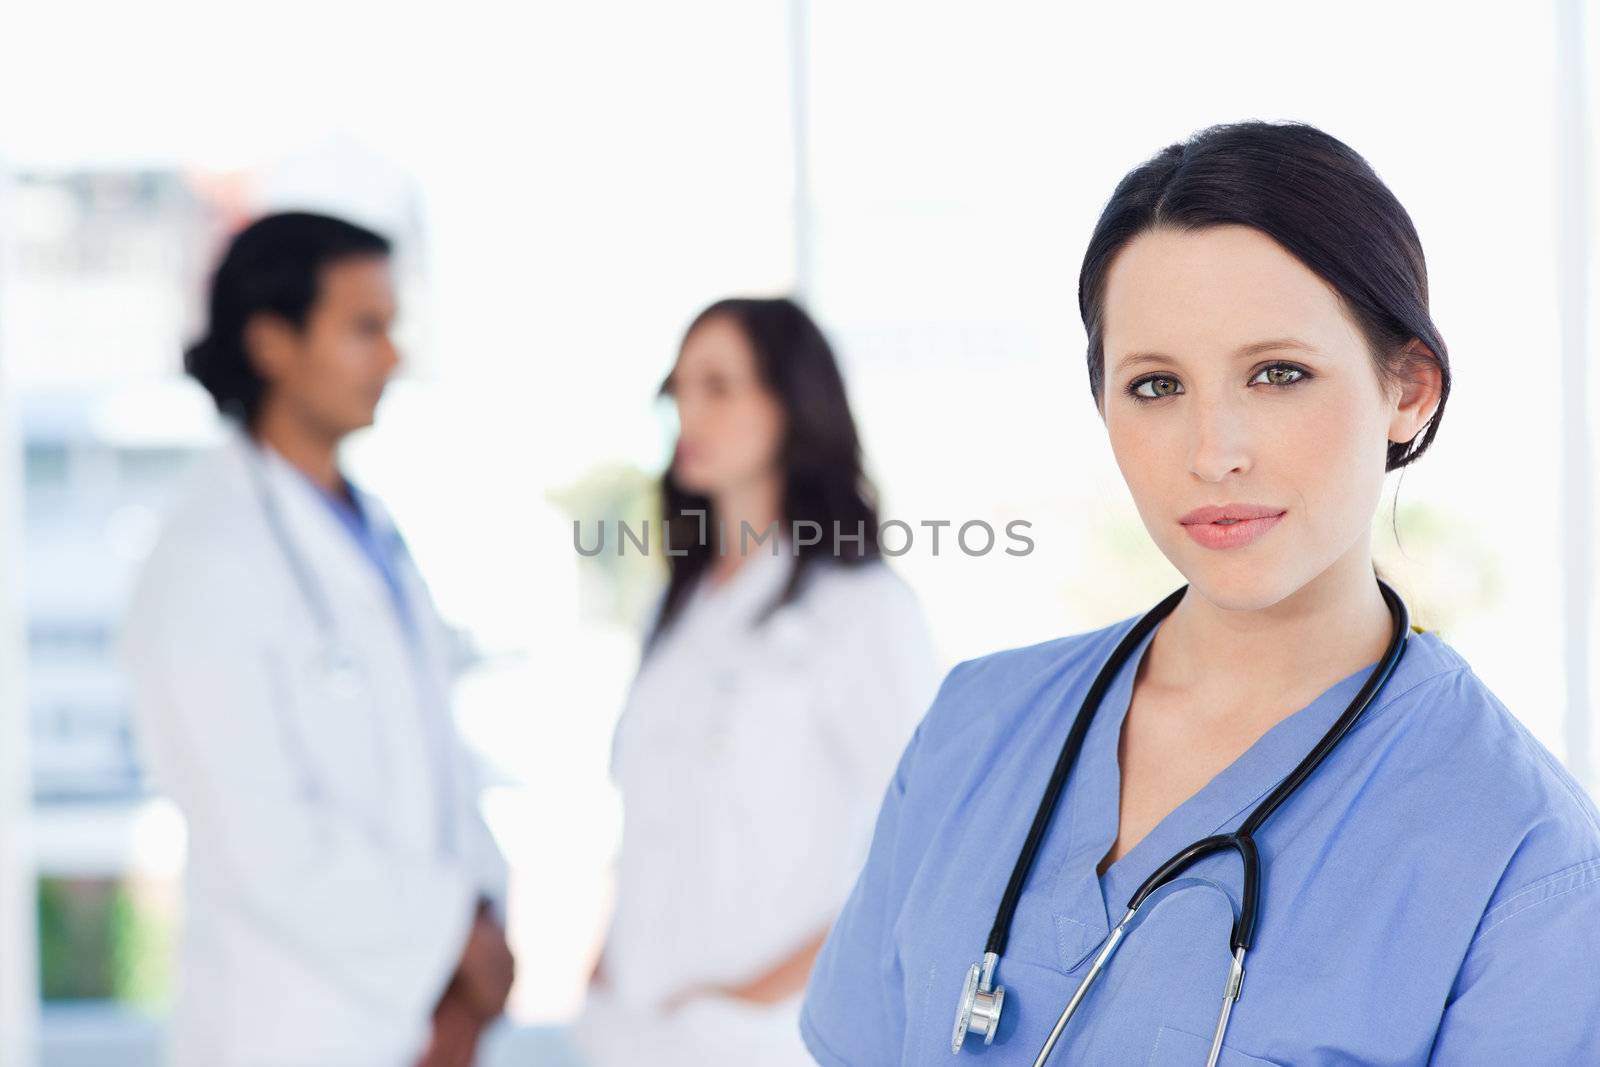 Young nurse calmly standing upright with her stethoscope around her neck